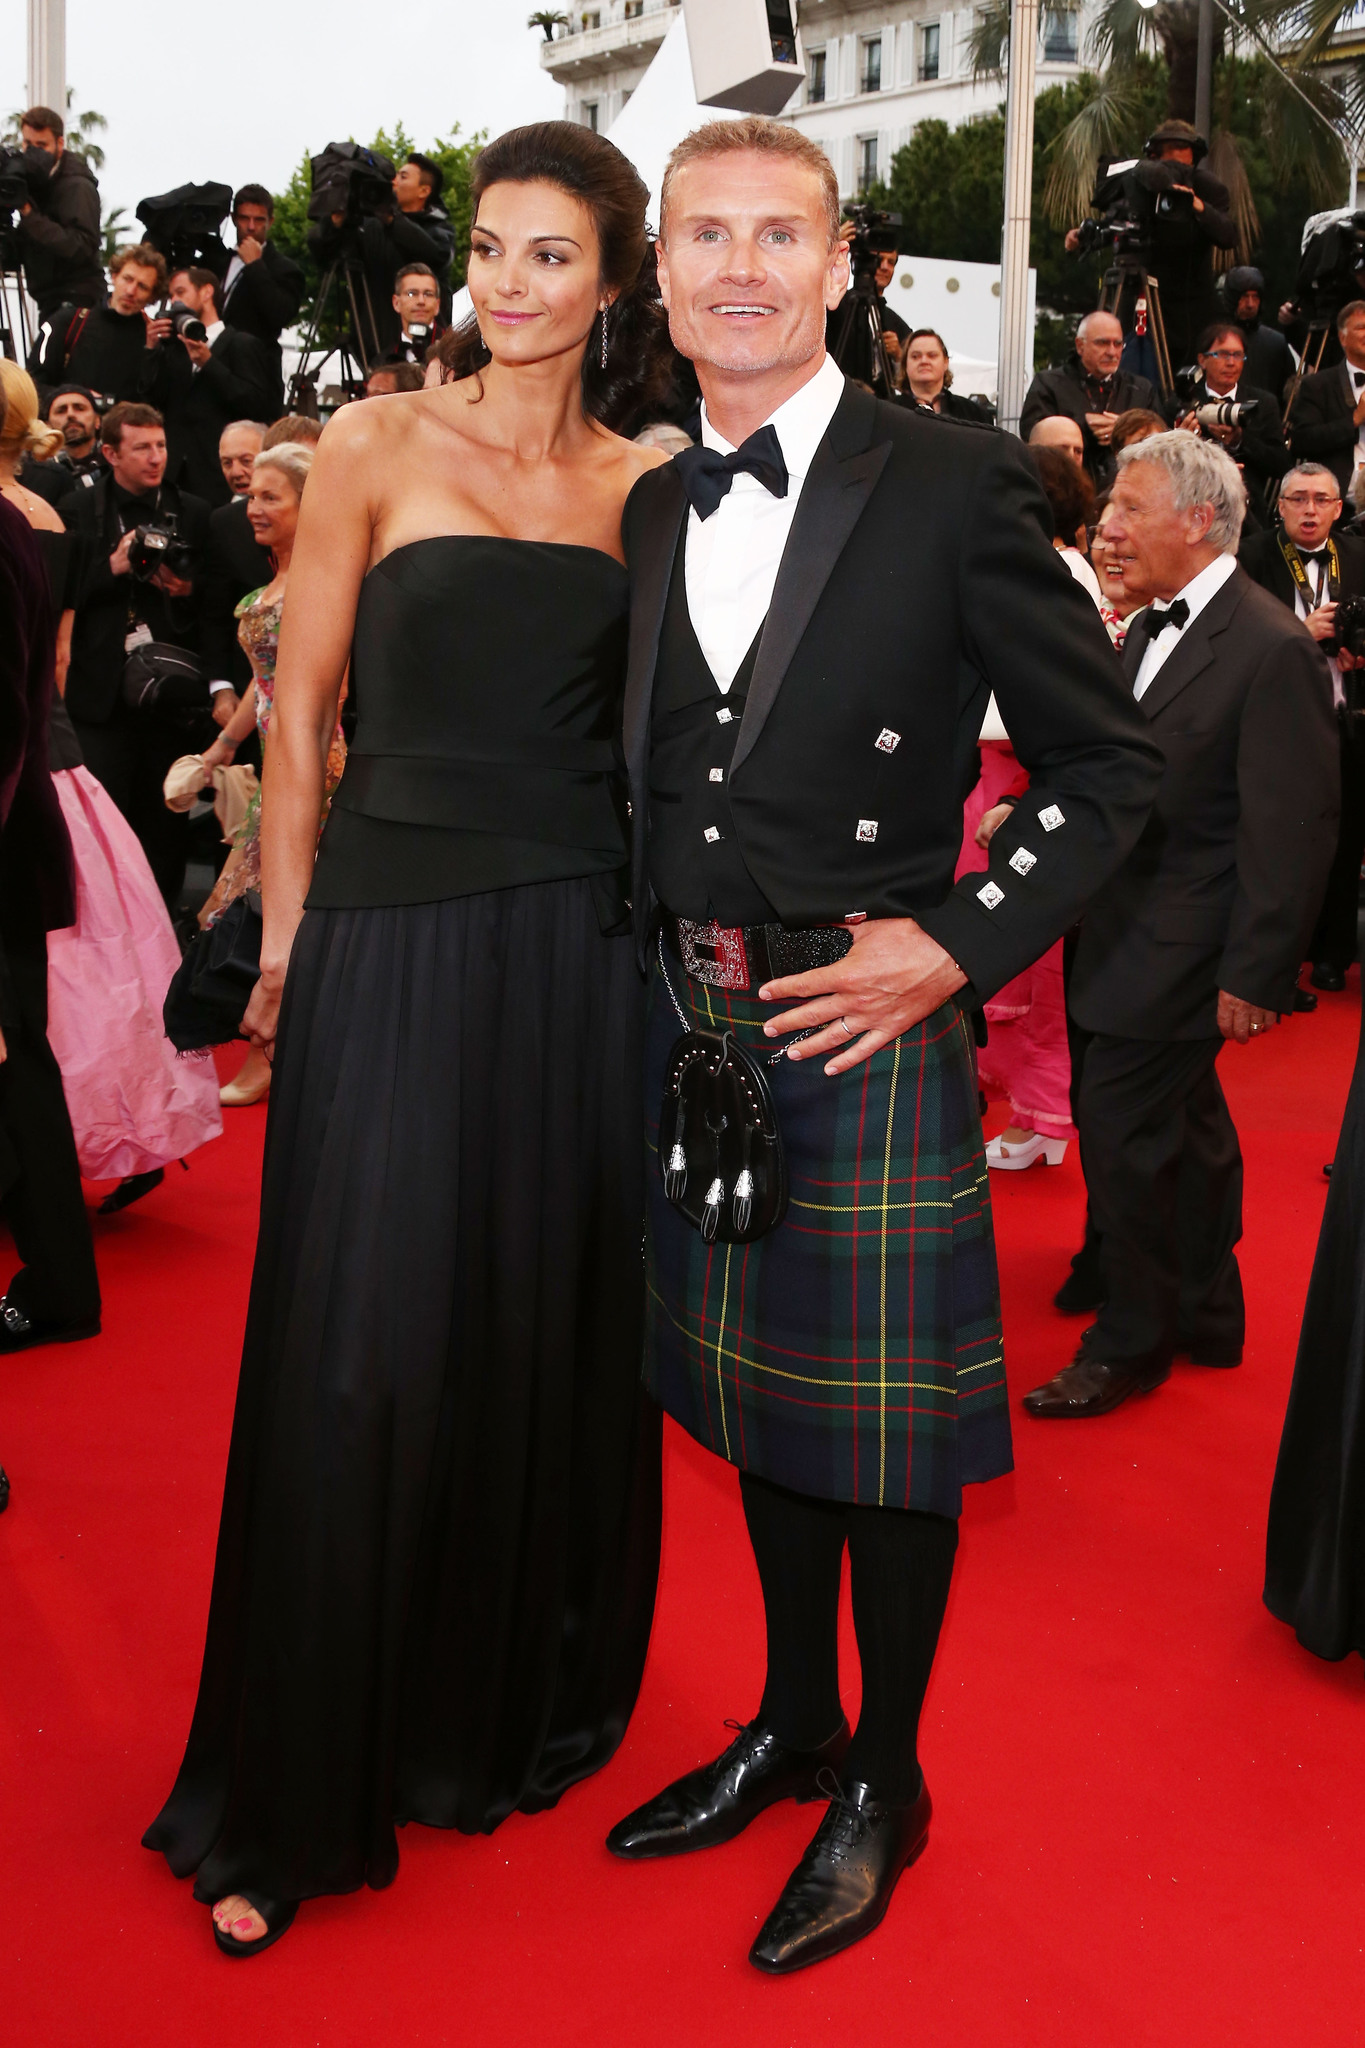 Former Formula 1 driver David Coulthard (R) and Karen Minier attend 'Weekend Of A Champion' Premiere during the 66th Annual Cannes Film Festival at Palais des Festivals on May 22, 2013 in Cannes, France.